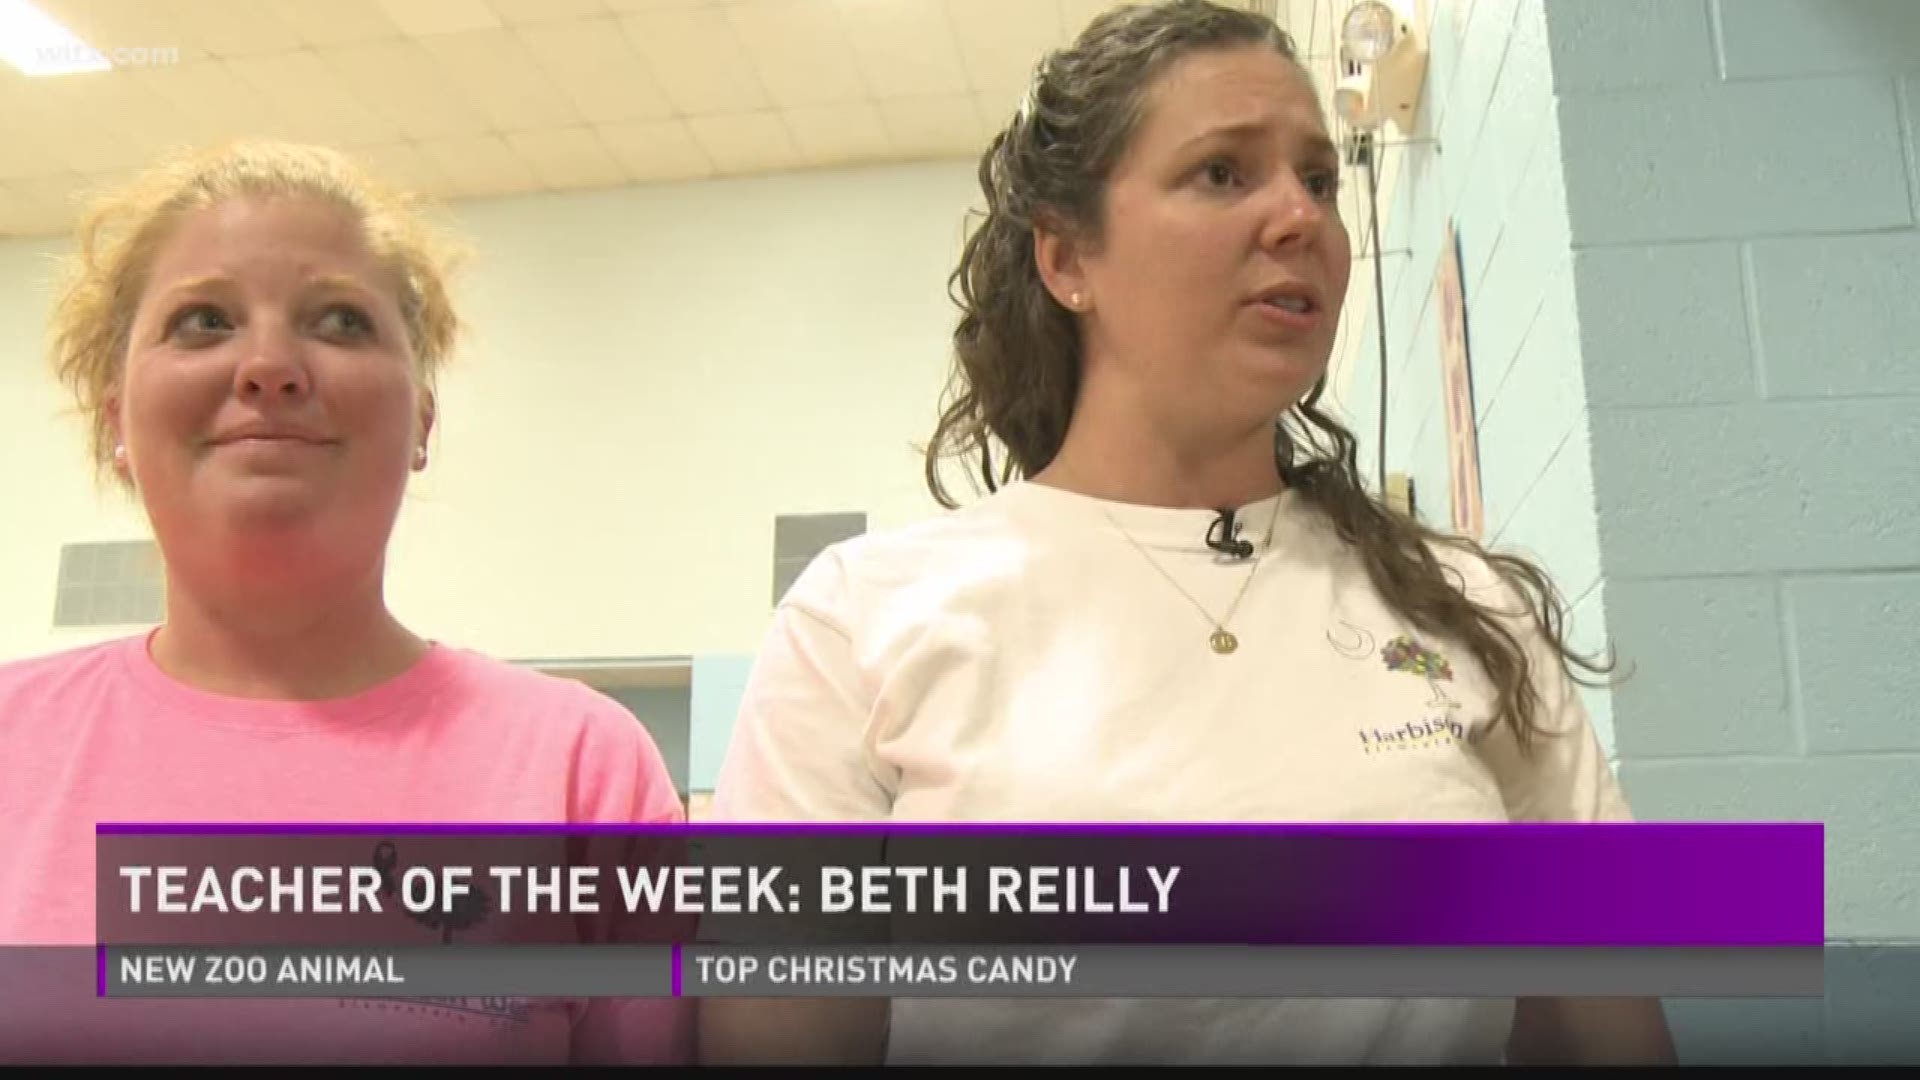 Beth Reilly is an early childhood educator at Harbison West Elementary School.